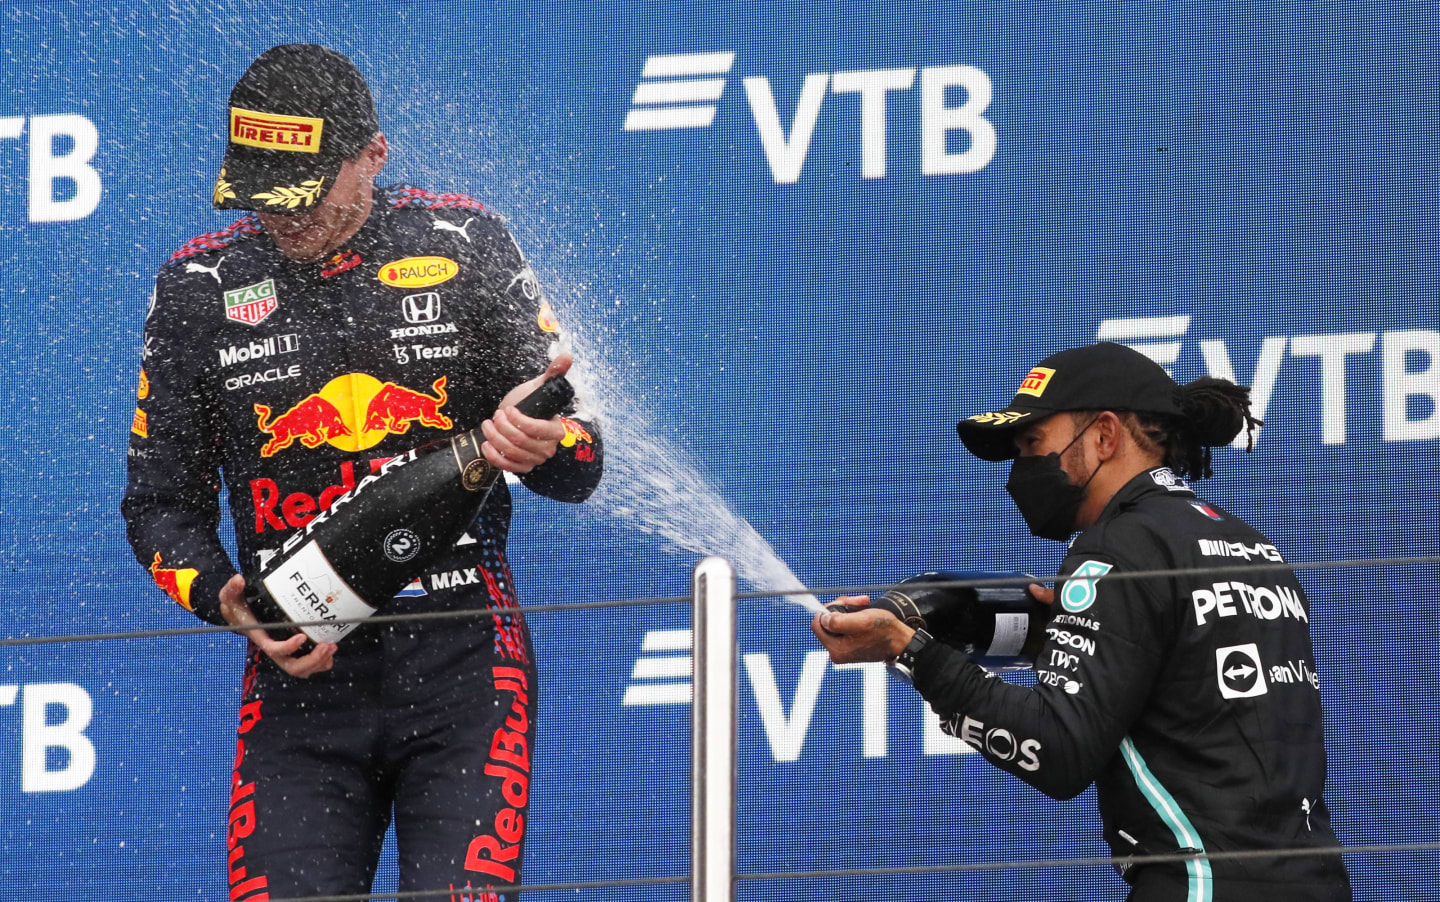 SOCHI, RUSSIA - SEPTEMBER 26: Race winner Lewis Hamilton of Great Britain and Mercedes GP celebrates on the podium with second placed Max Verstappen of Netherlands and Red Bull Racing during the F1 Grand Prix of Russia at Sochi Autodrom on September 26, 2021 in Sochi, Russia. (Photo by Yuri Kochetkov - Pool/Getty Images)